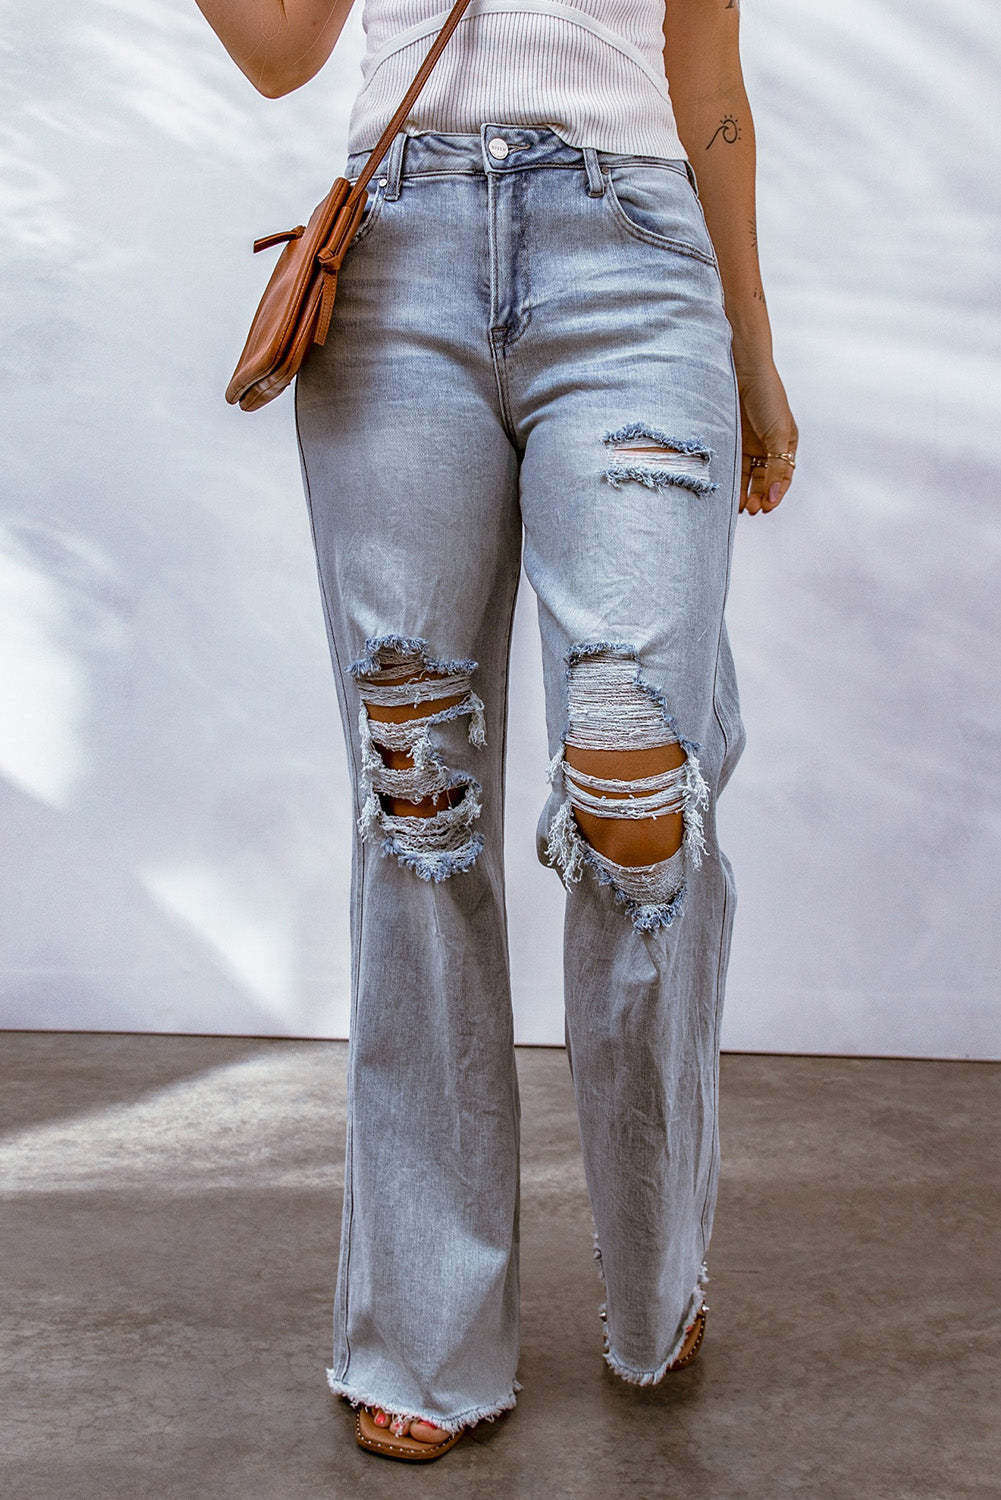 Solid Cut-out Shift Casual Ripped Jeans $ 46.99 - Evaless